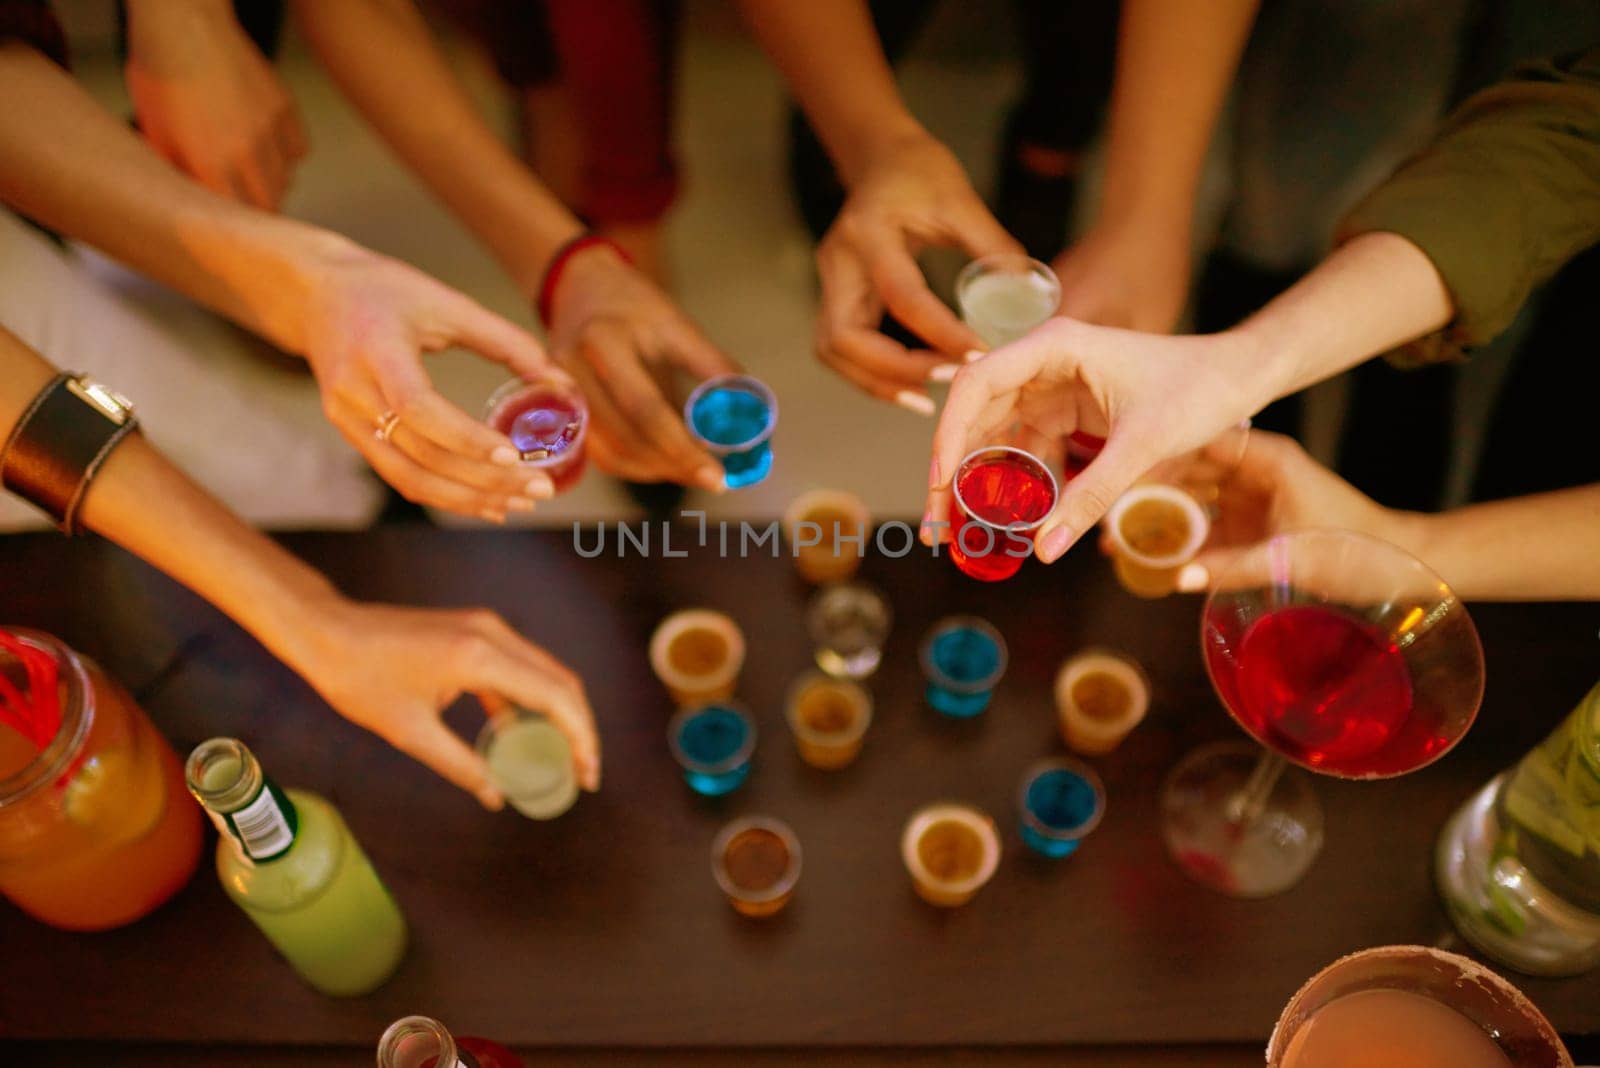 Party, glass and hands of people with alcohol shots at event for toast, celebration or bonding together. Cheers, cocktail beverage and friends group for happy hour, social gathering or entertainment by YuriArcurs